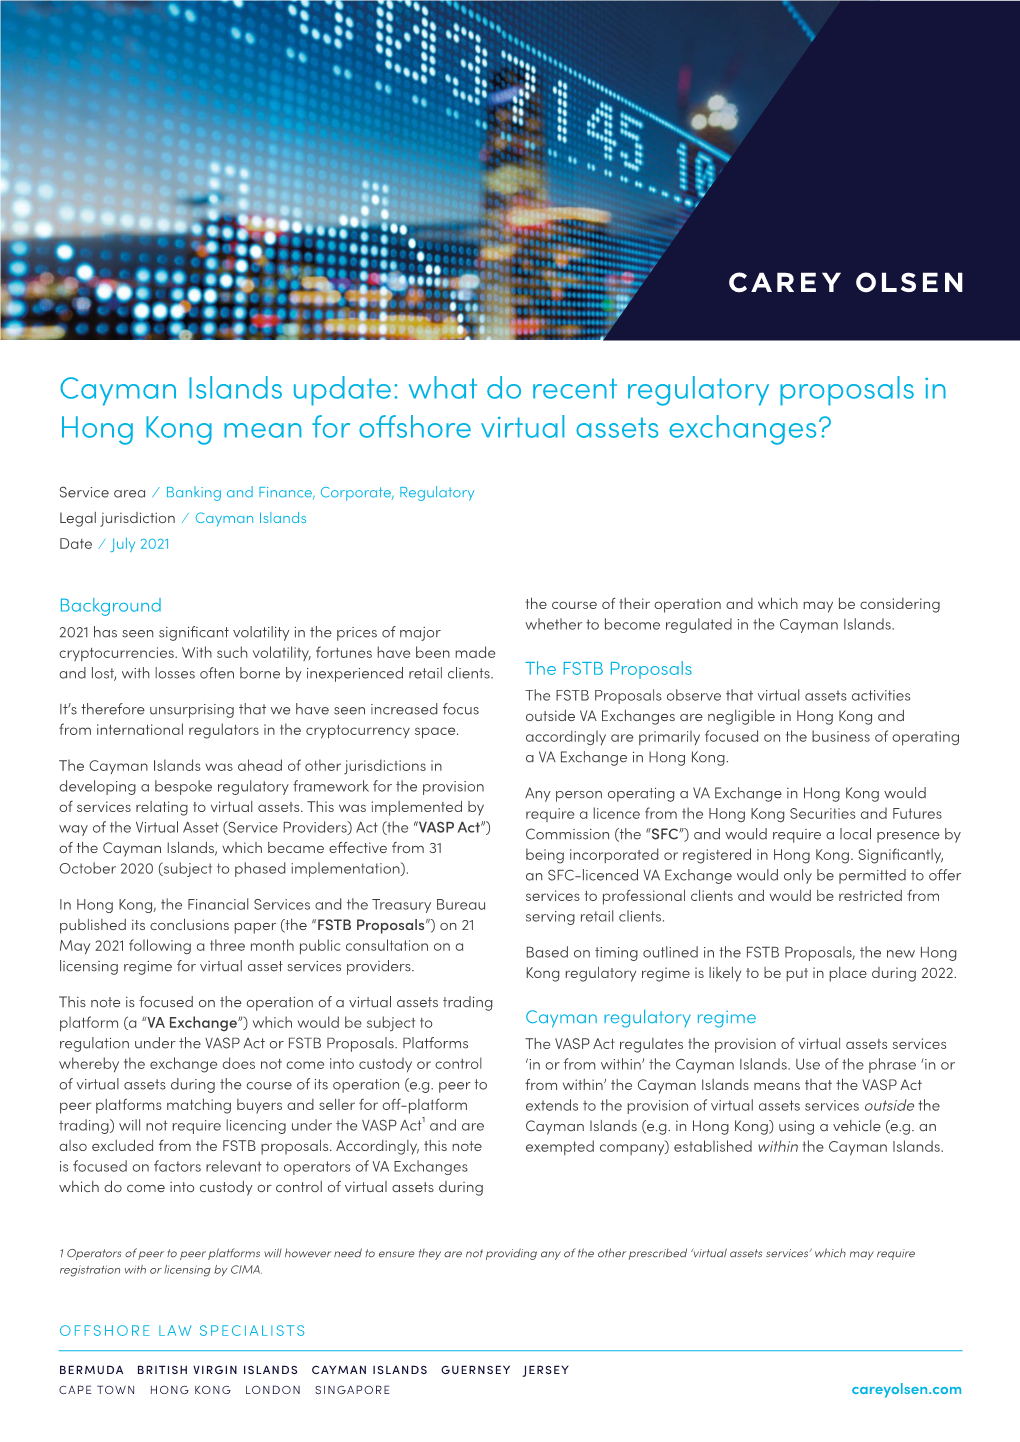 What Do Recent Regulatory Proposals in Hong Kong Mean for Offshore Virtual Assets Exchanges?